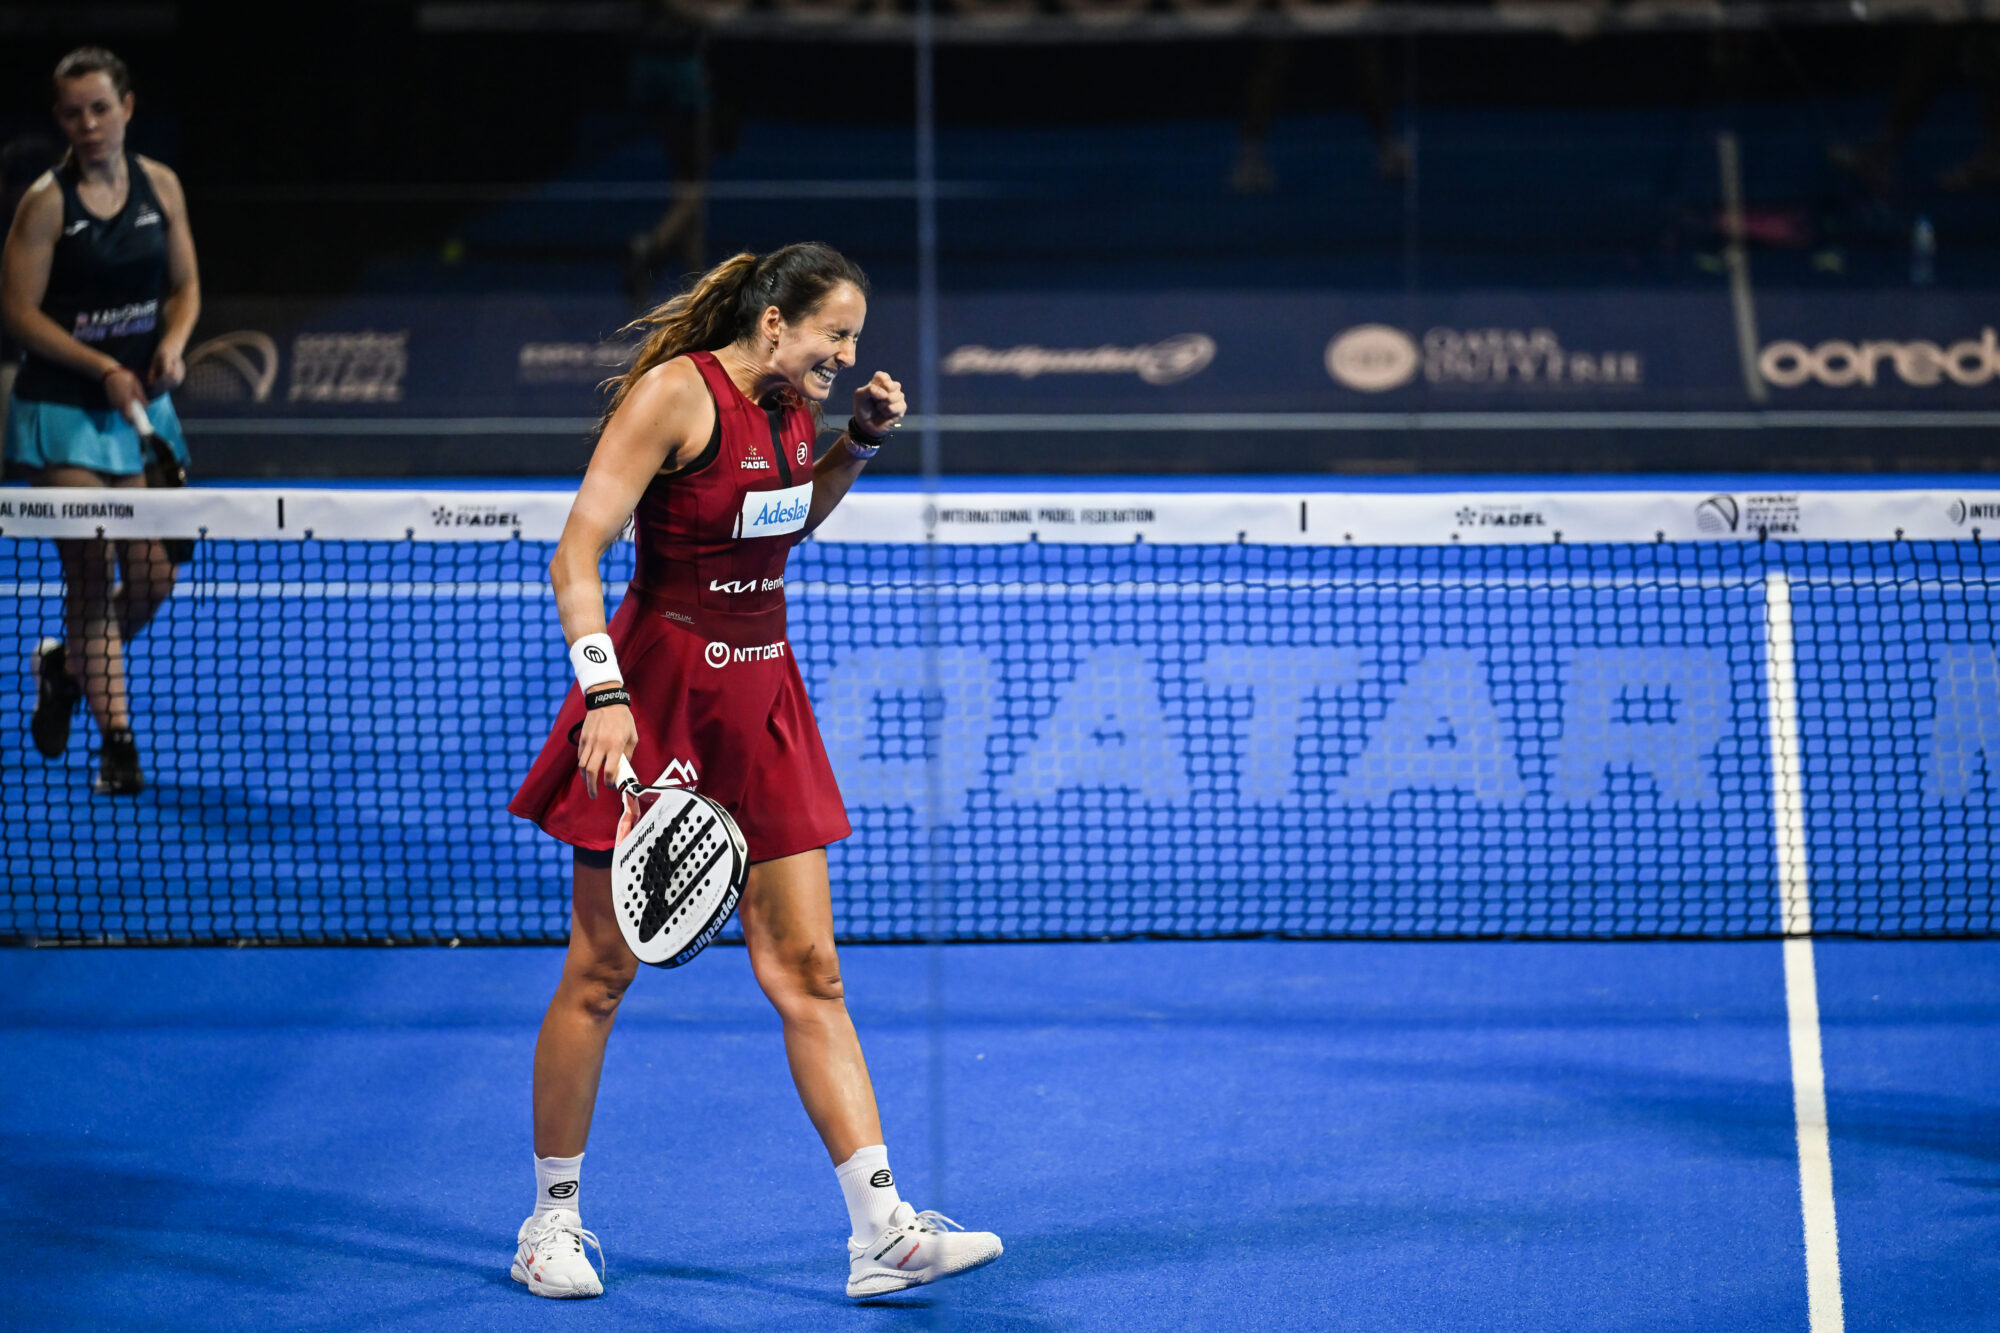 Qatar Major – Gemma Triay: “With Marta, we did not know how to give our best version”